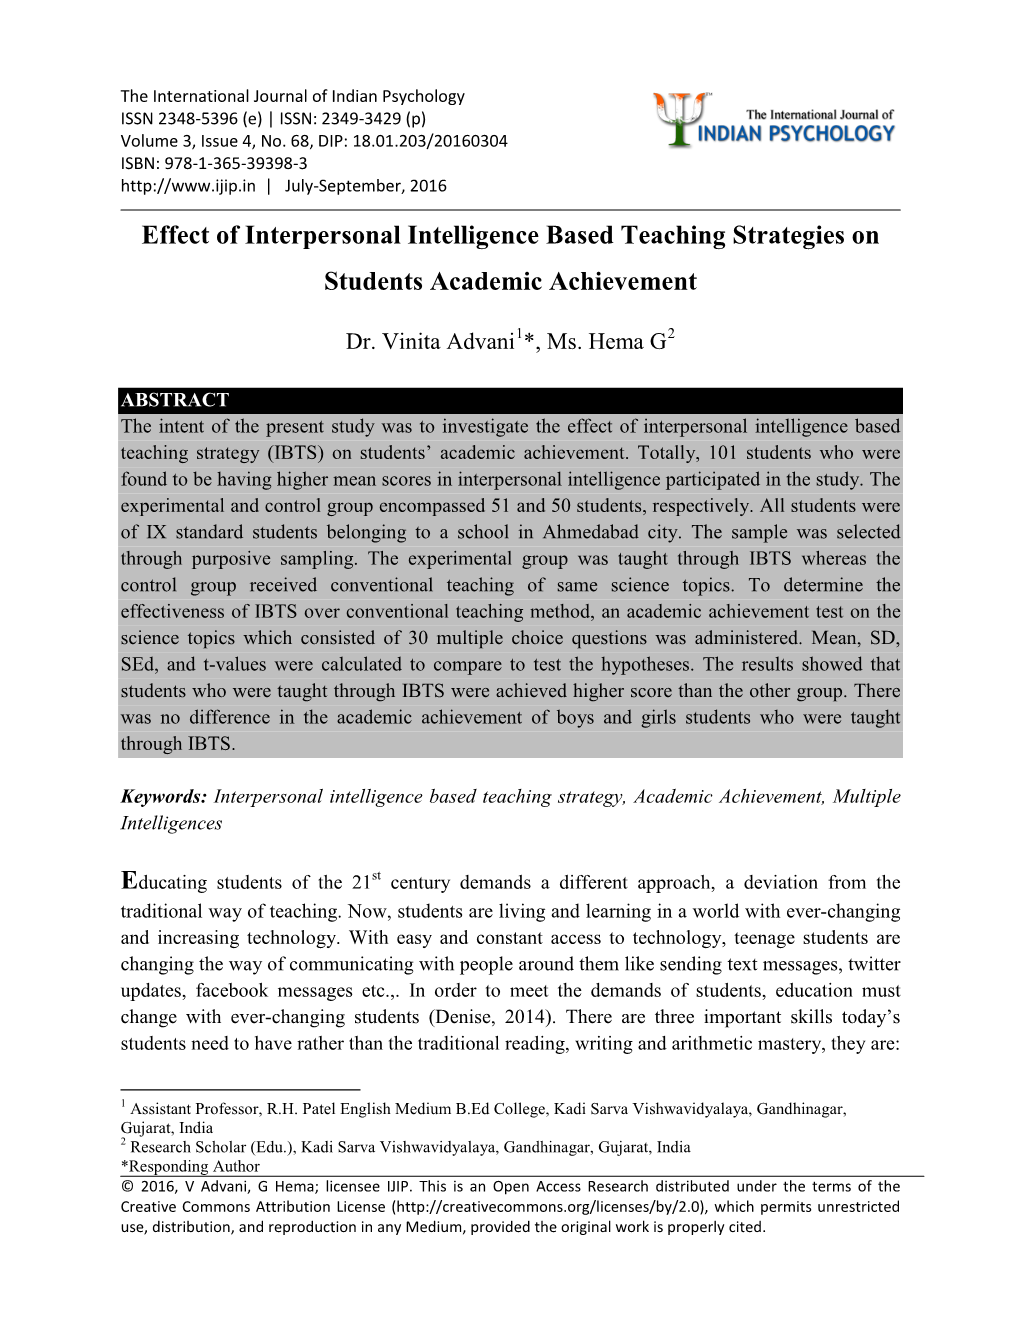 Effect of Interpersonal Intelligence Based Teaching Strategies on Students Academic Achievement